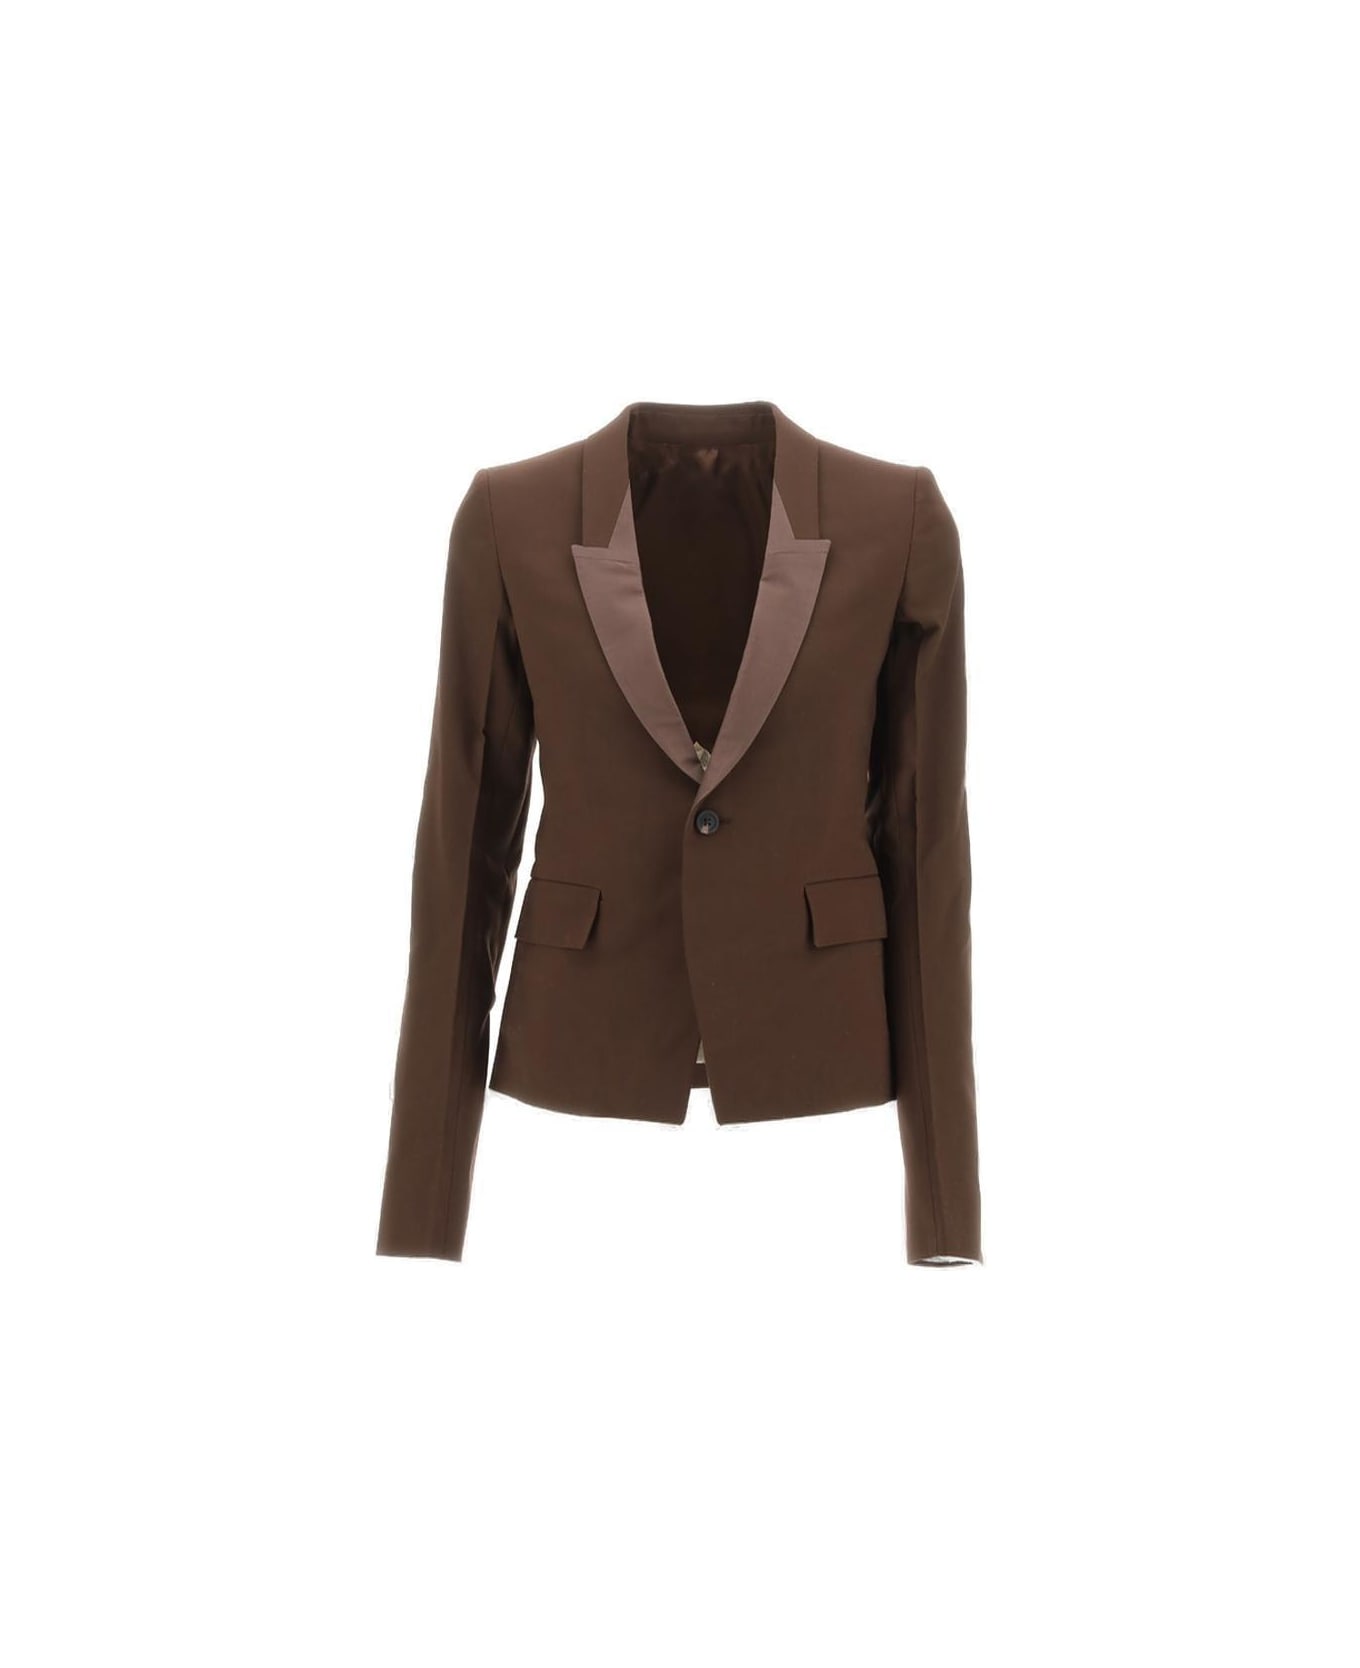 Rick Owens Single-breasted Tailored Blazer - BROWN  